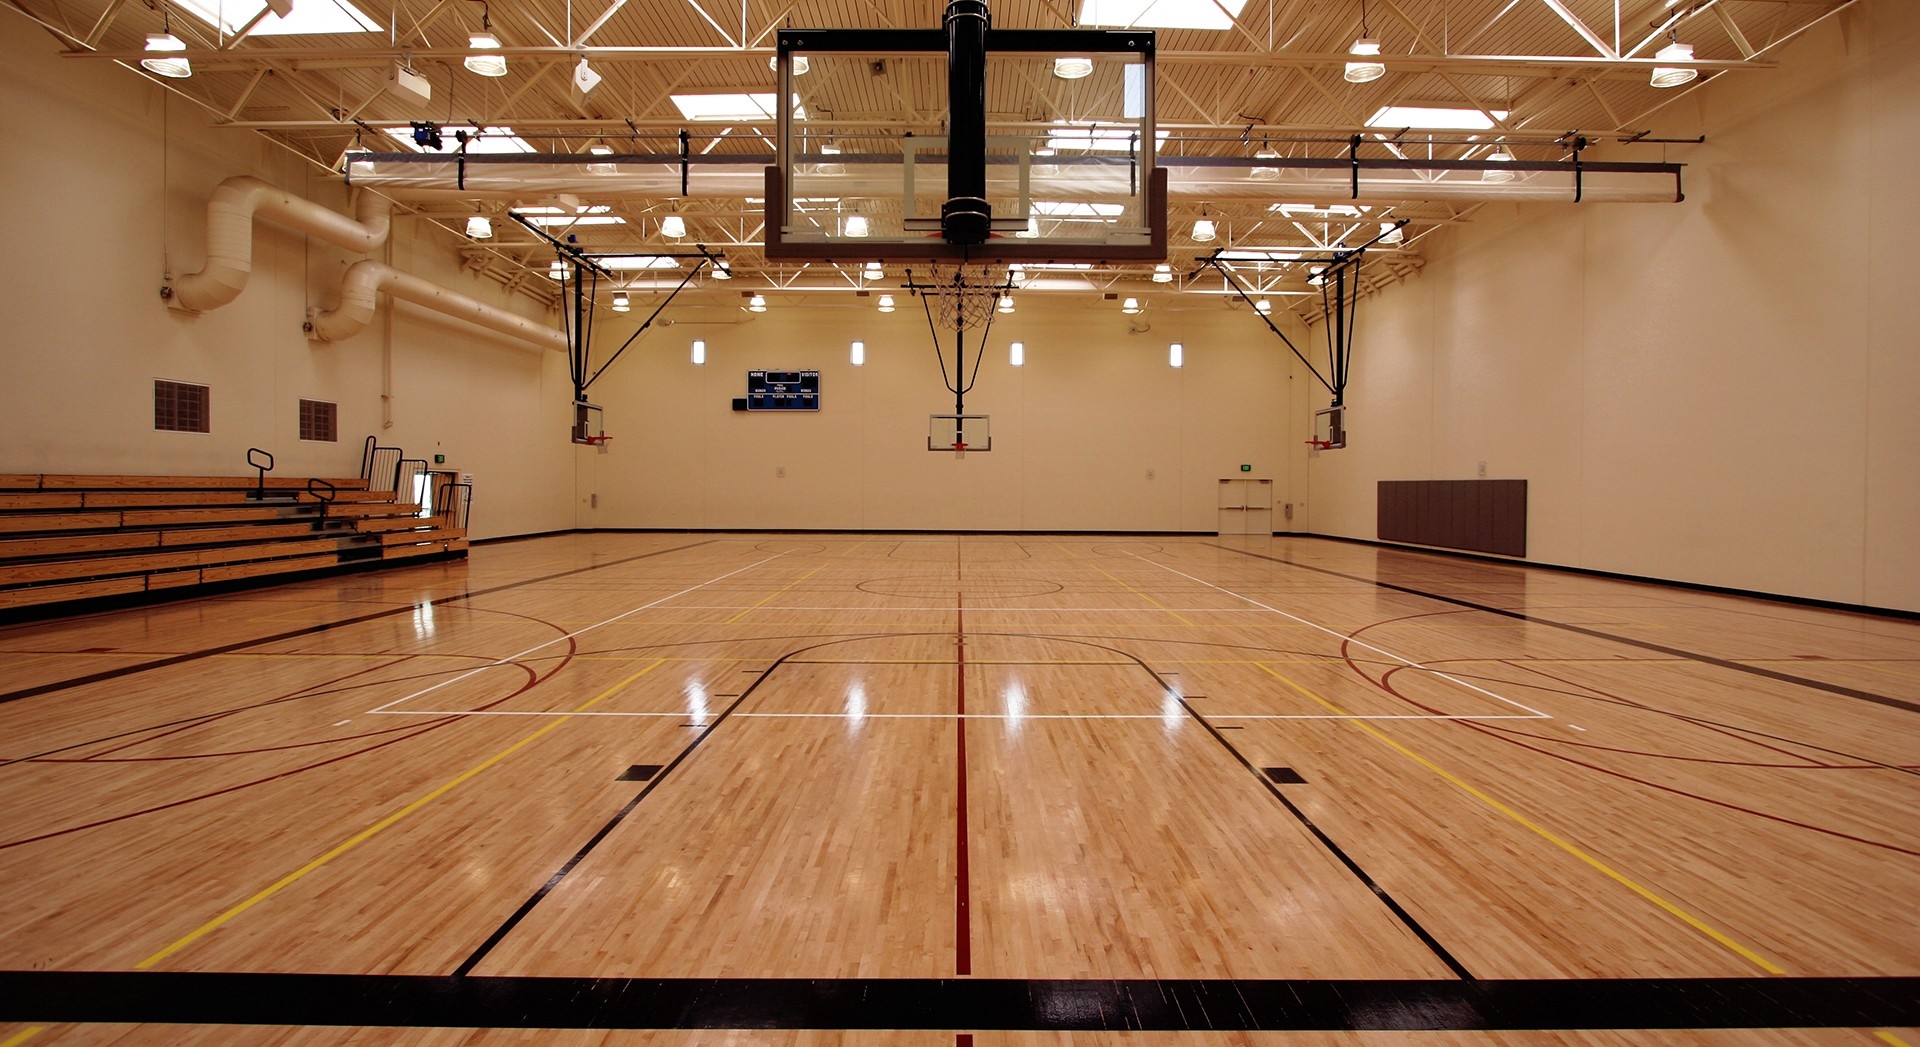 How to extend the lifetime of sport floors?